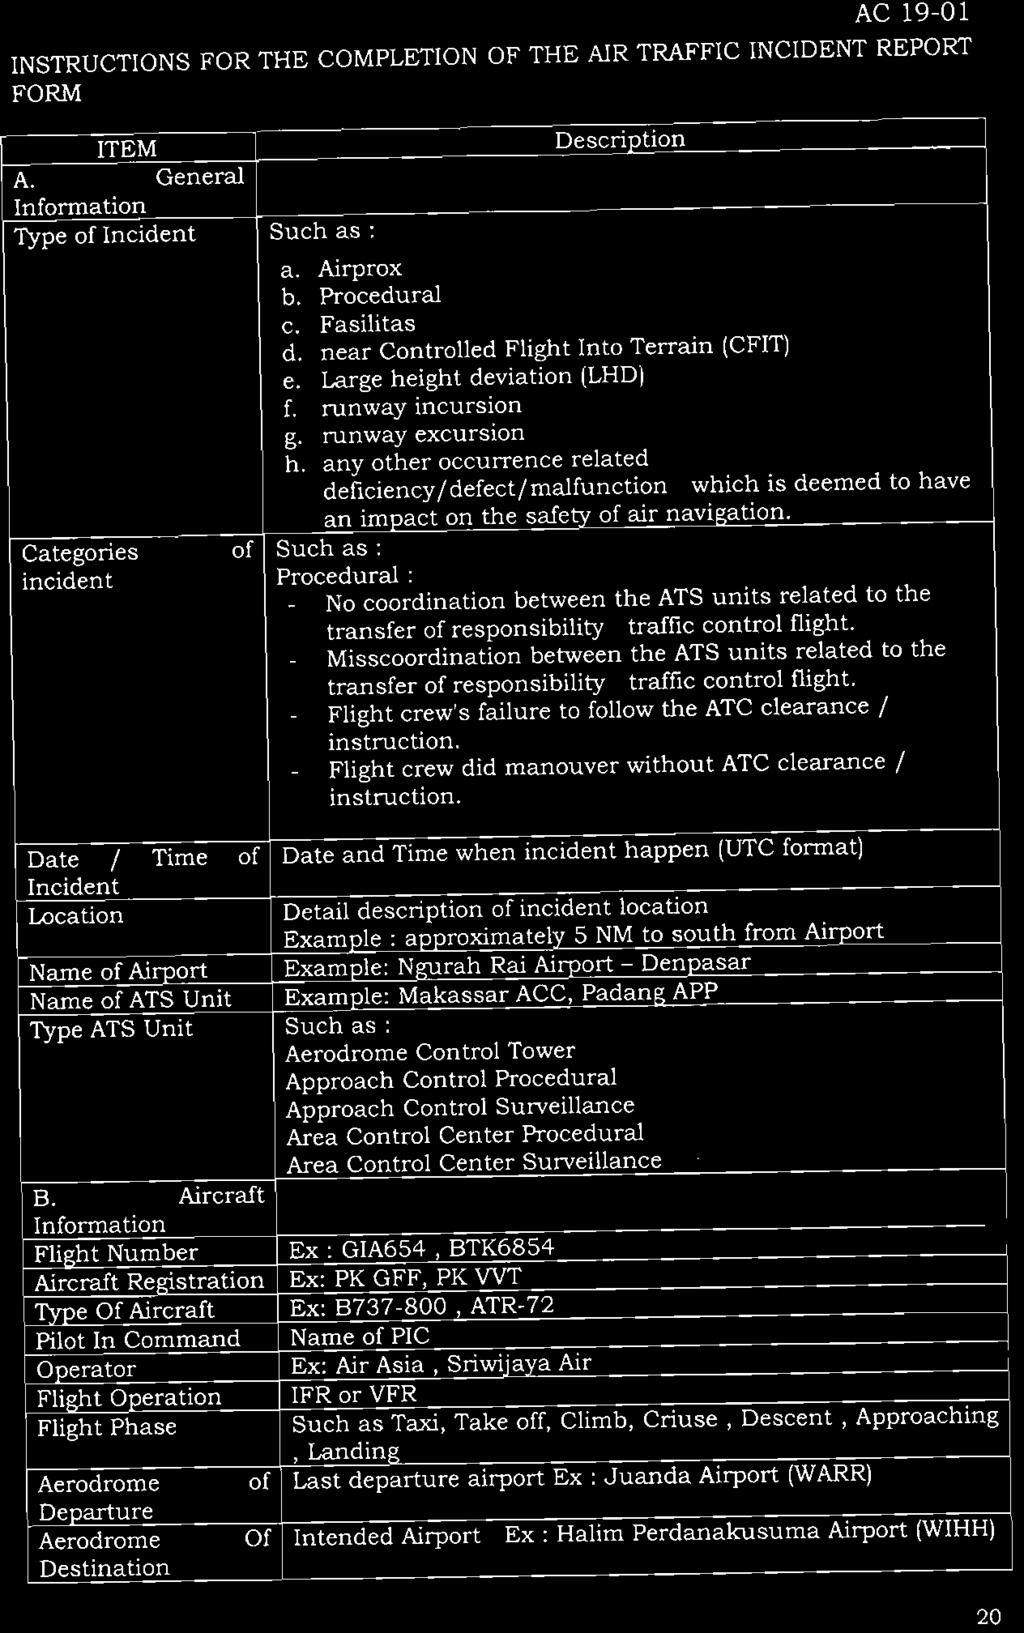 INSTRUCTIONS FOR THE COMPLETION OF THE AIR TRAFFIC INCIDENT REPORT FORM ITEM A.